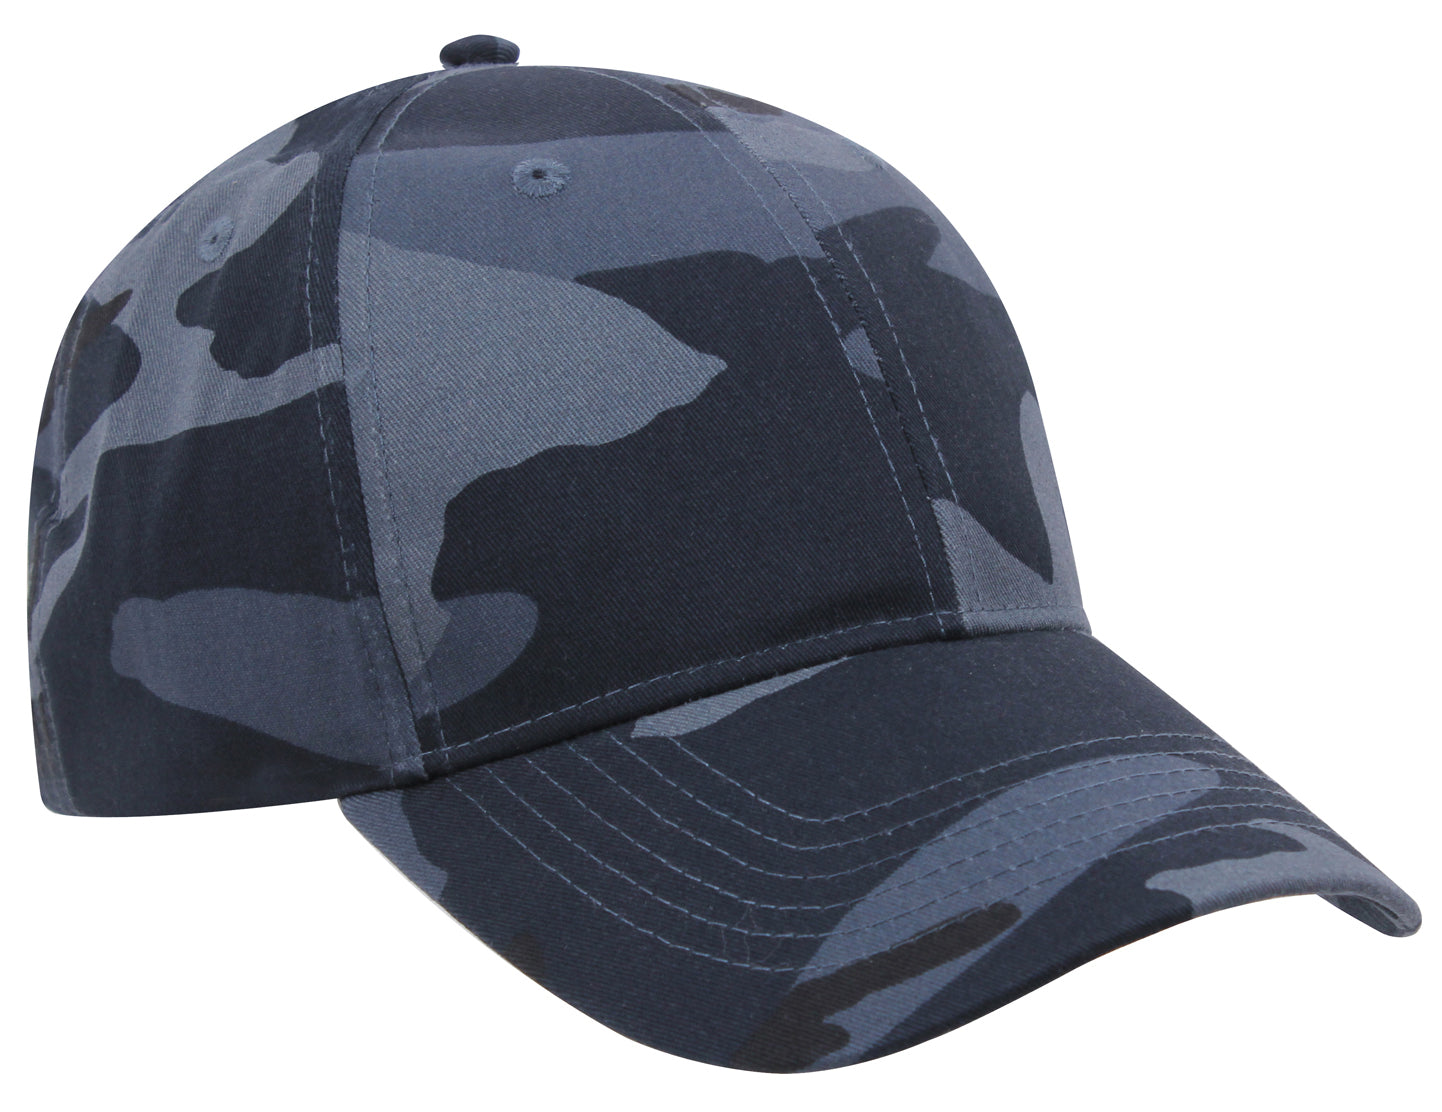 Midnight Blue Camo Mid-Low Profile Baseball Style Hat - Rothco Adjustable Cap